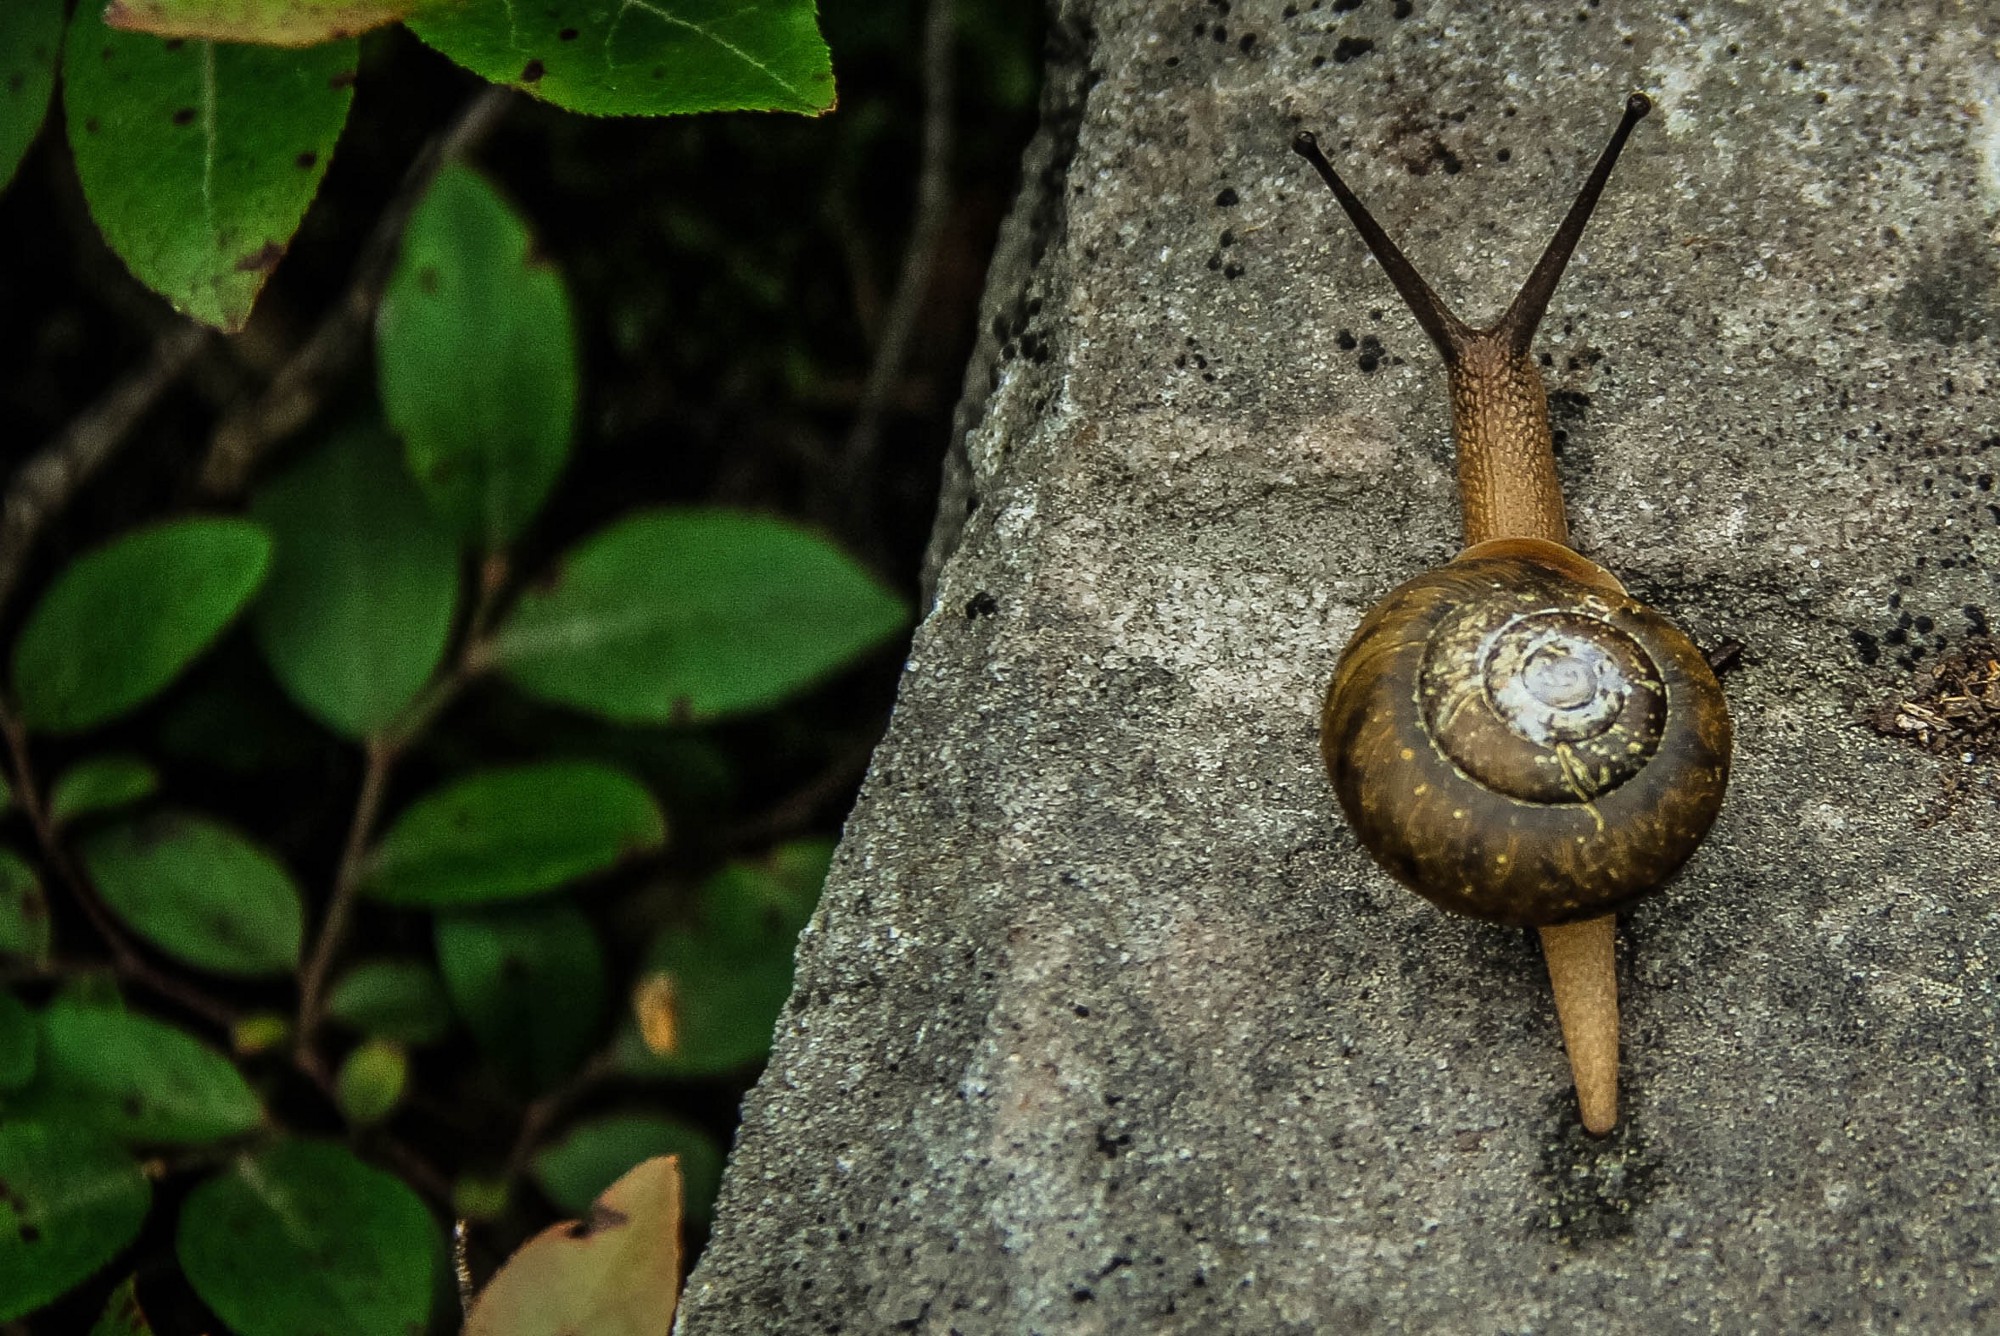 Have a problem? Find a snail. Learn from it. – Noteworthy - The ...